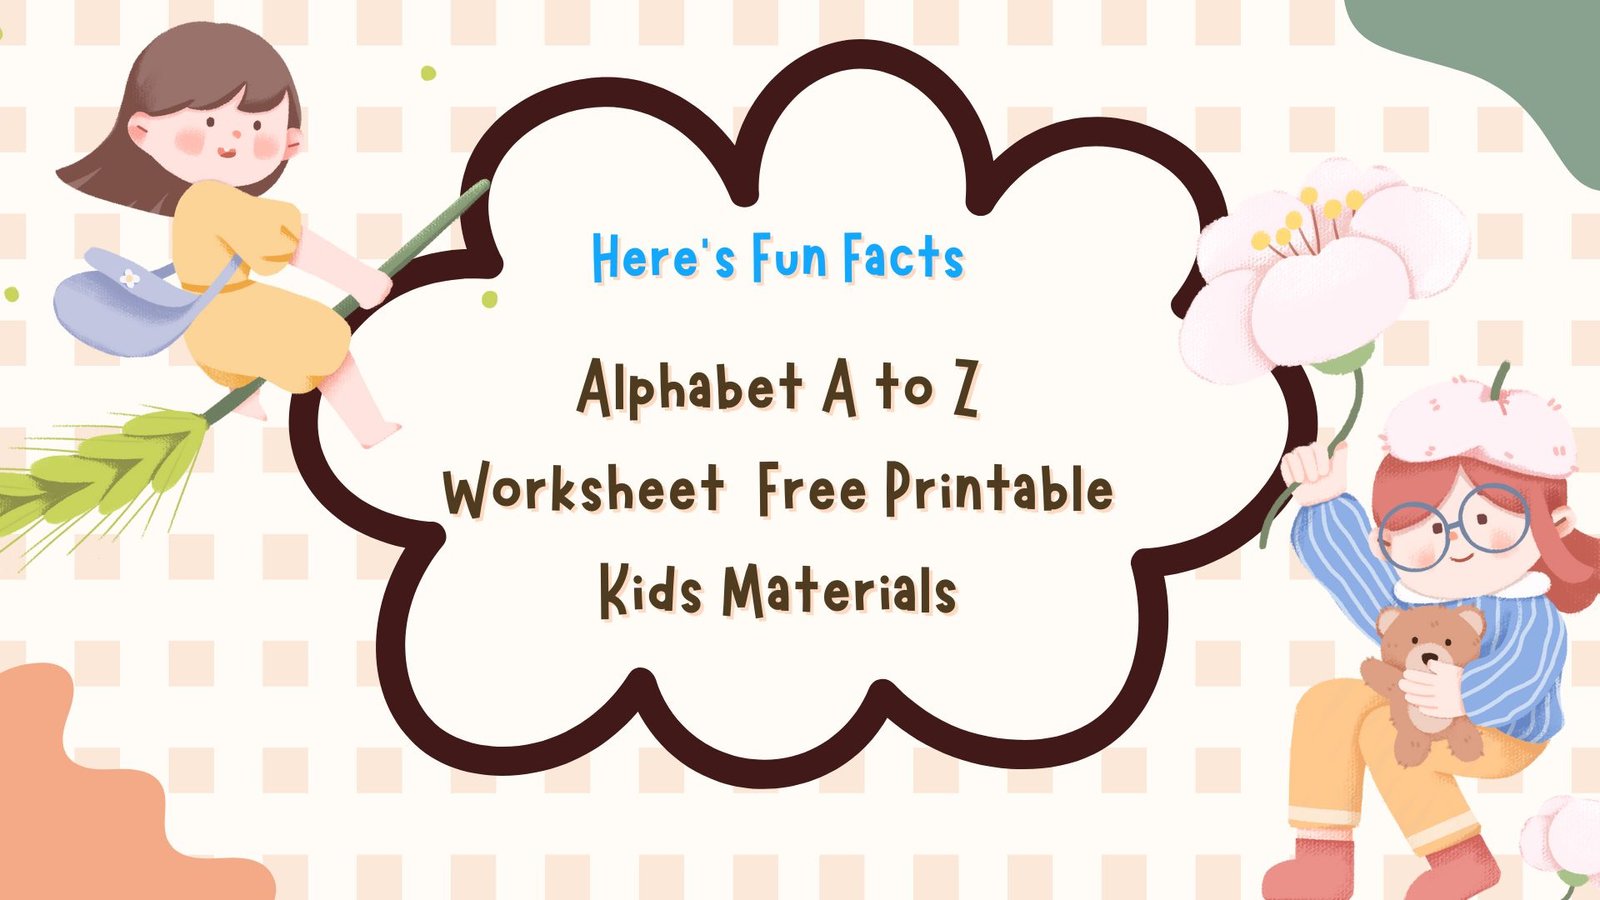 Alphabet A to Z Worksheet | Free Printable Kids Materials (26 Pages)